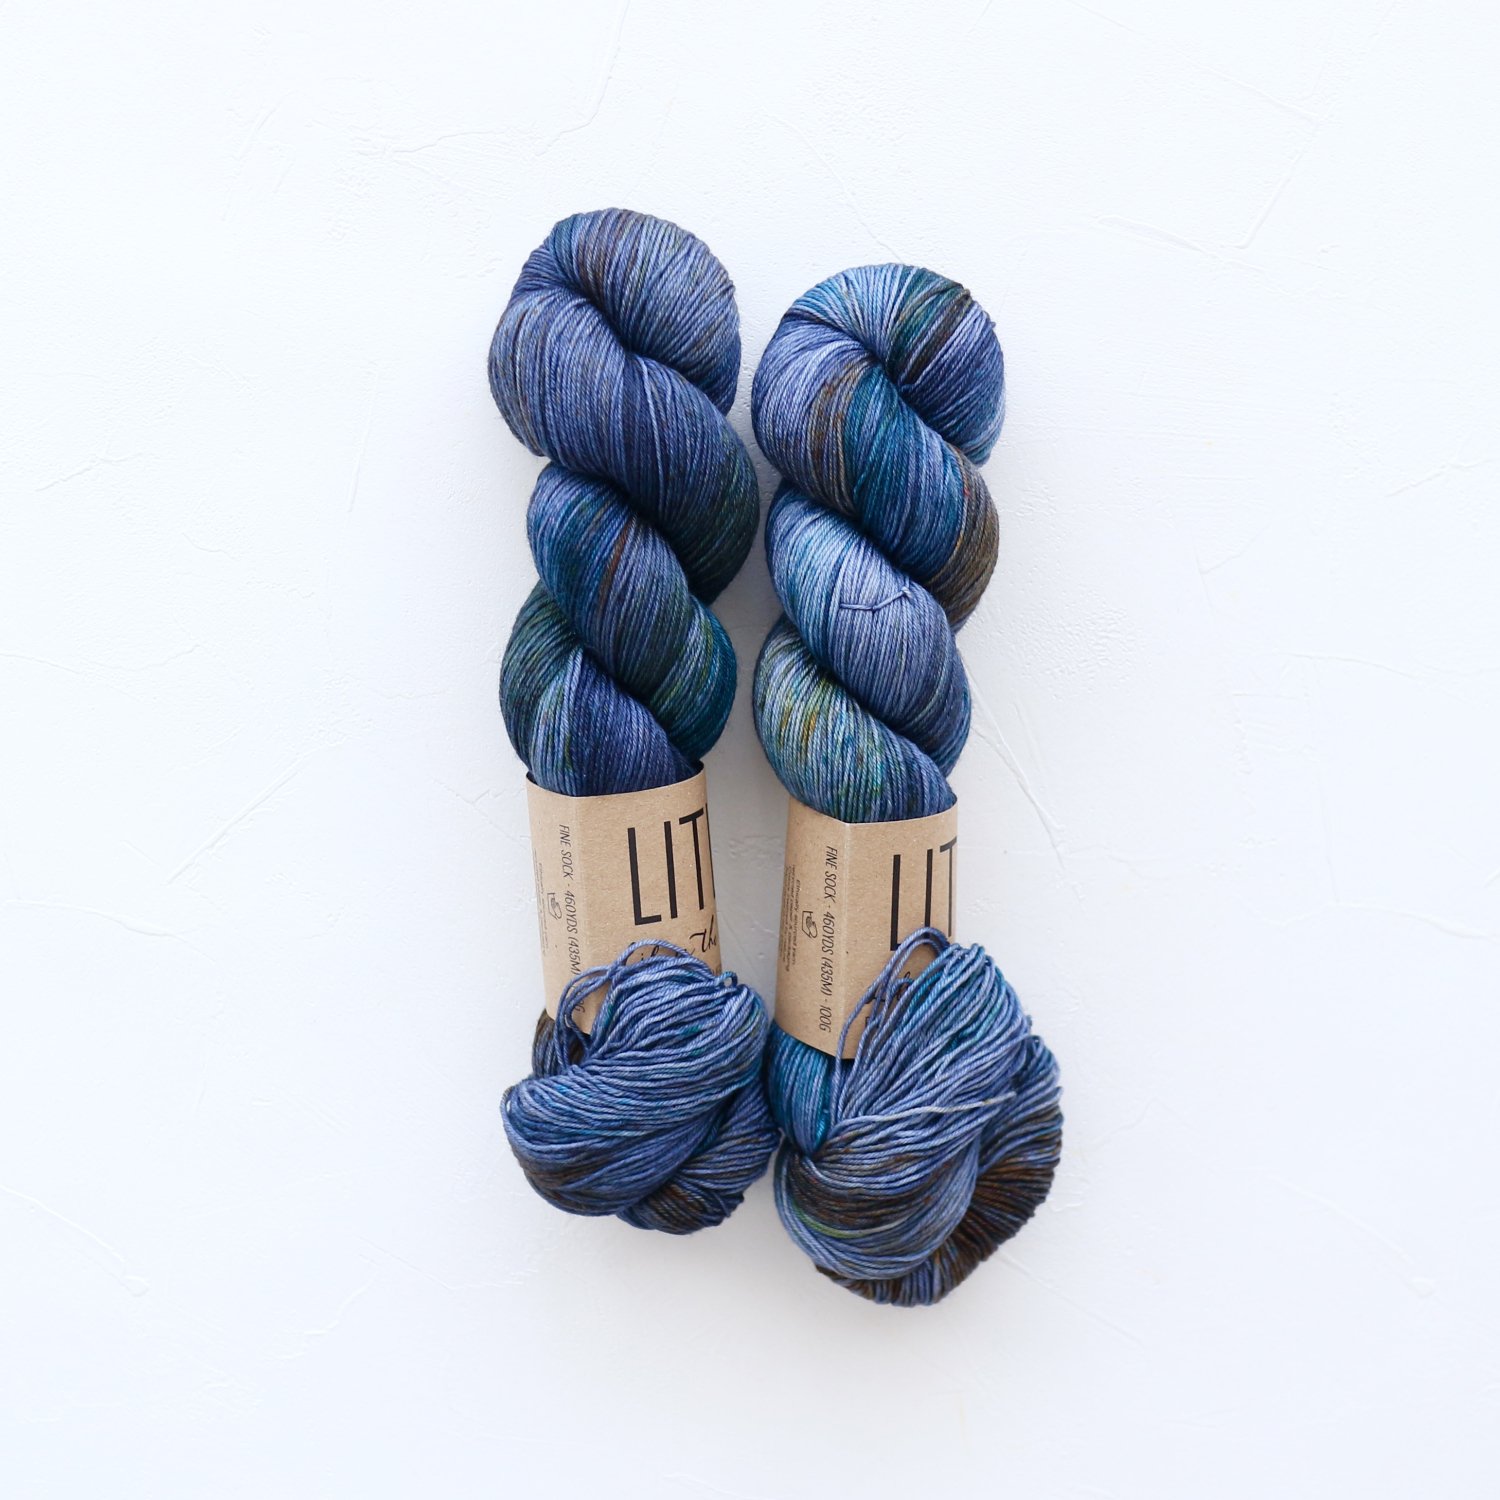 LIFE IN THE LONGGRASS<br>Fine Sock<br>Blue Silver